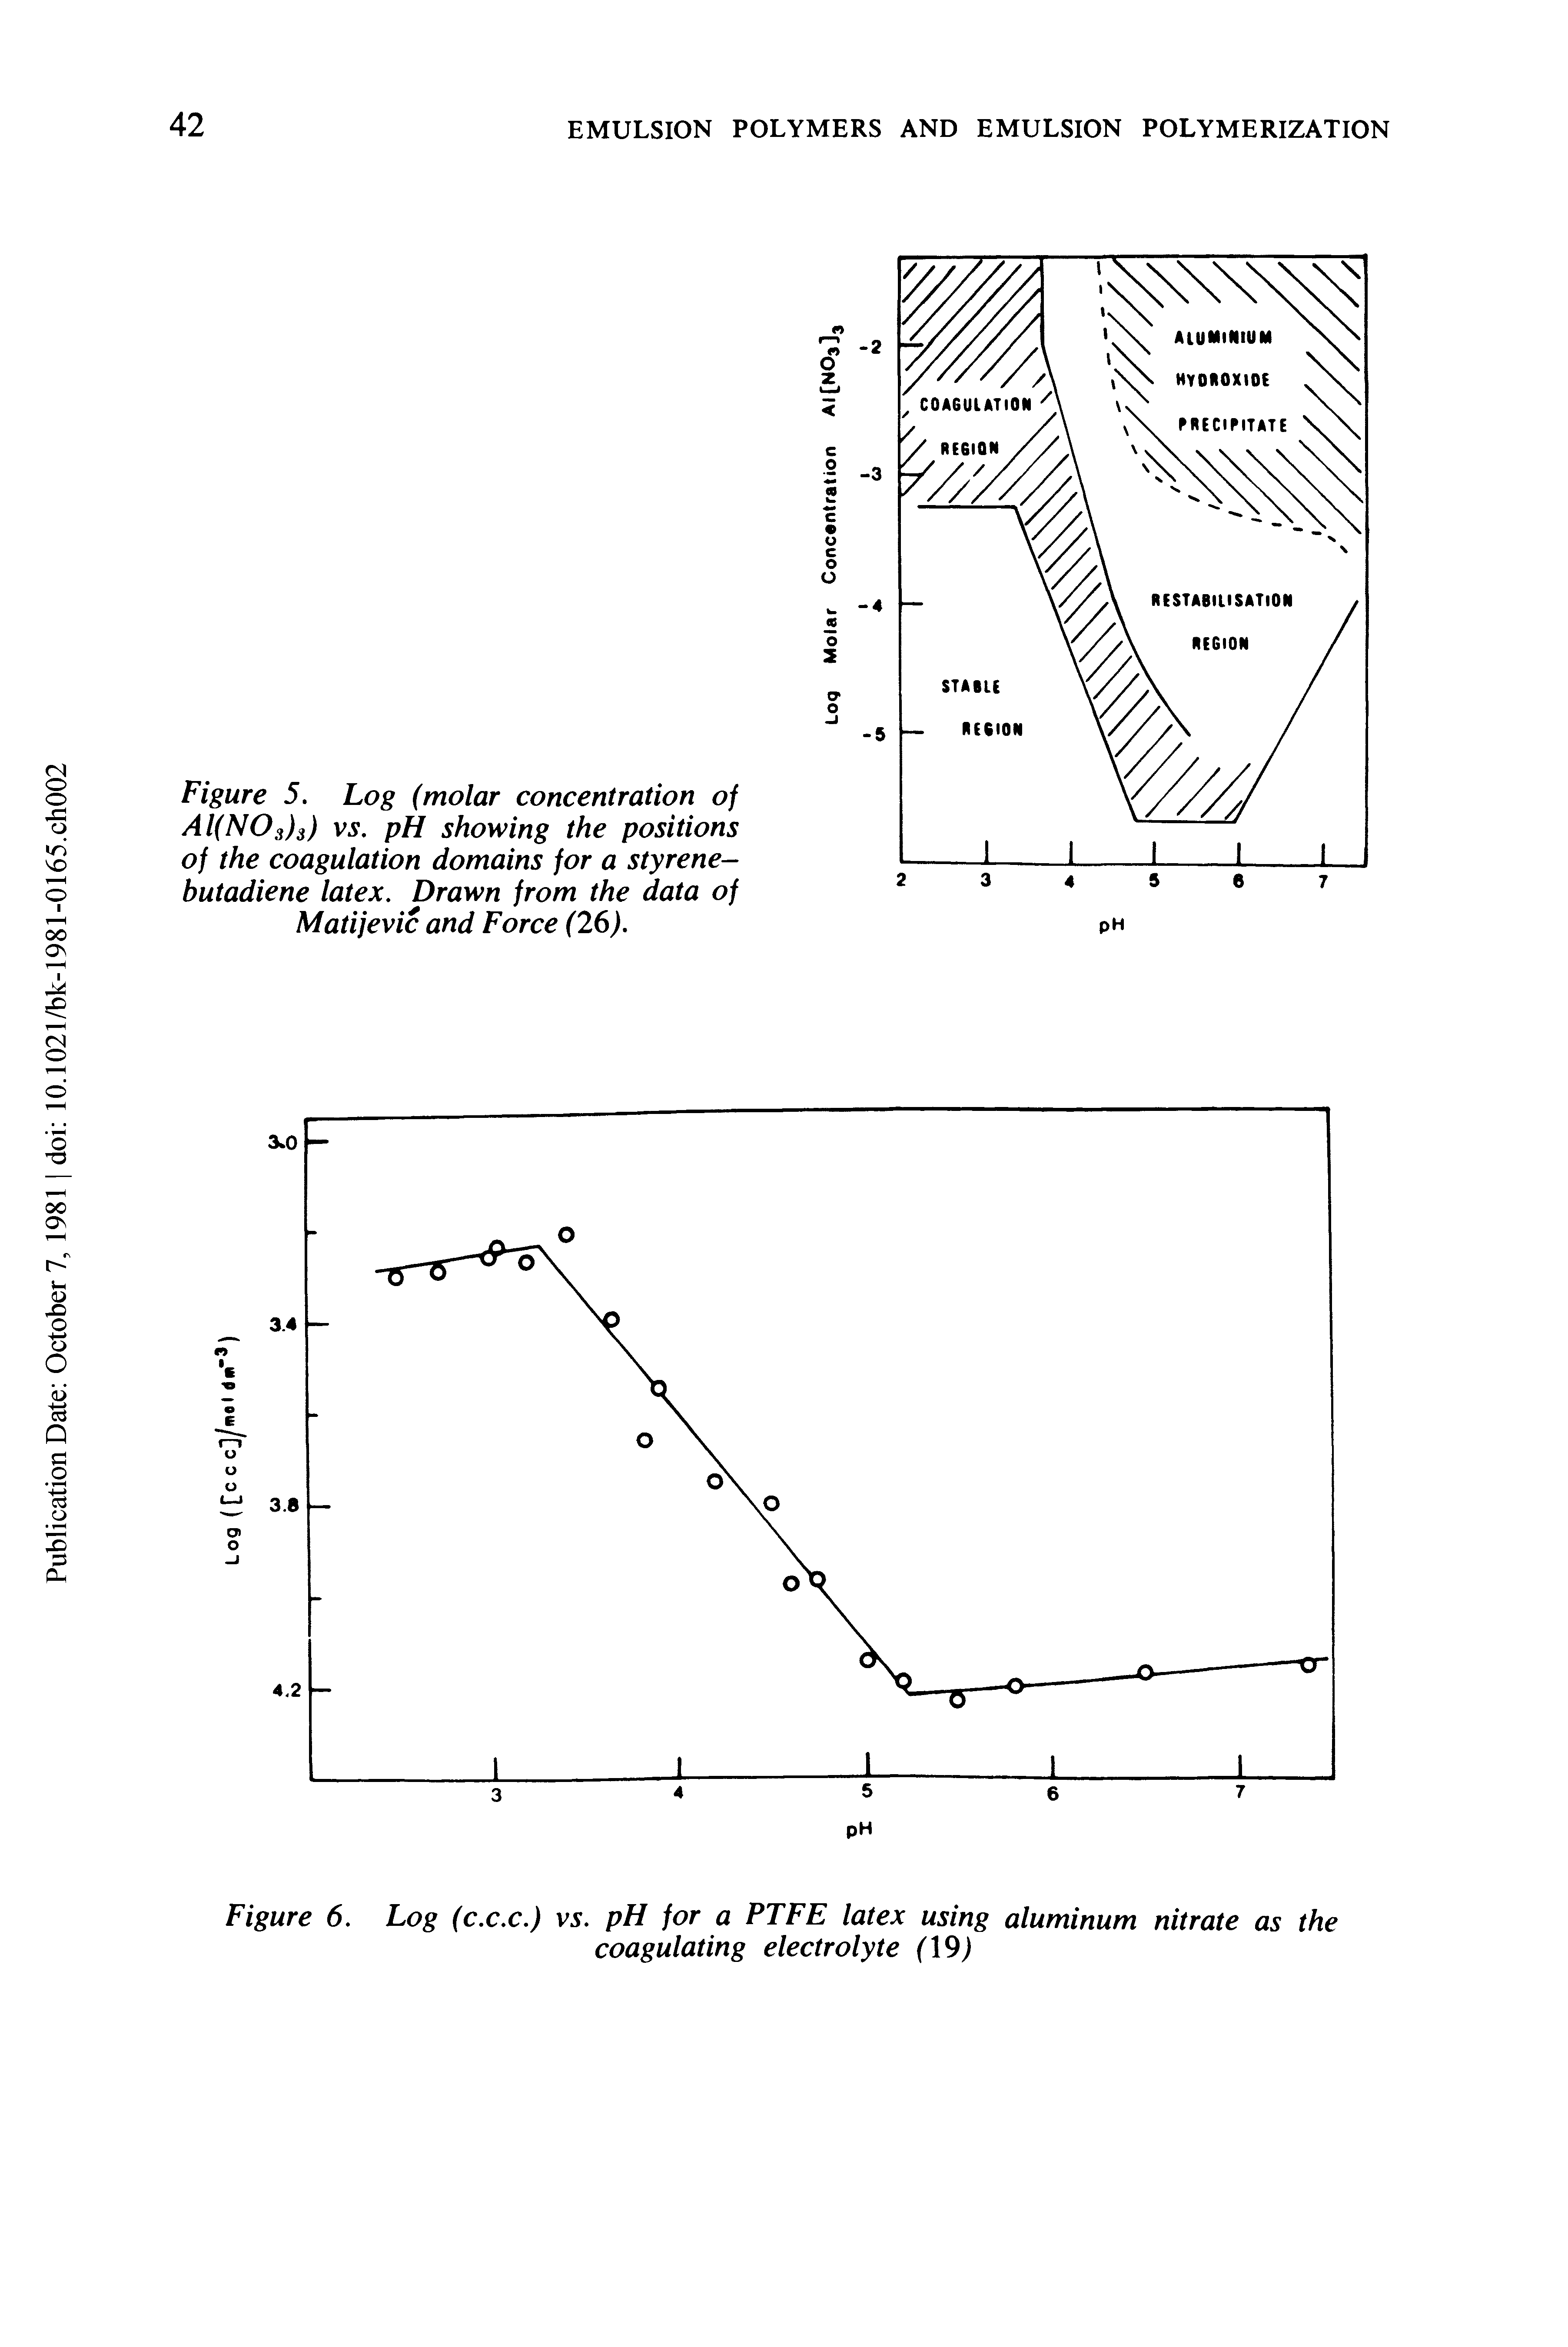 Figure 5. Log (molar concentration of Al(N03)3) vs. pH showing the positions of the coagulation domains for a styrene-butadiene latex. Drawn from the data of Matijevic and Force (26).